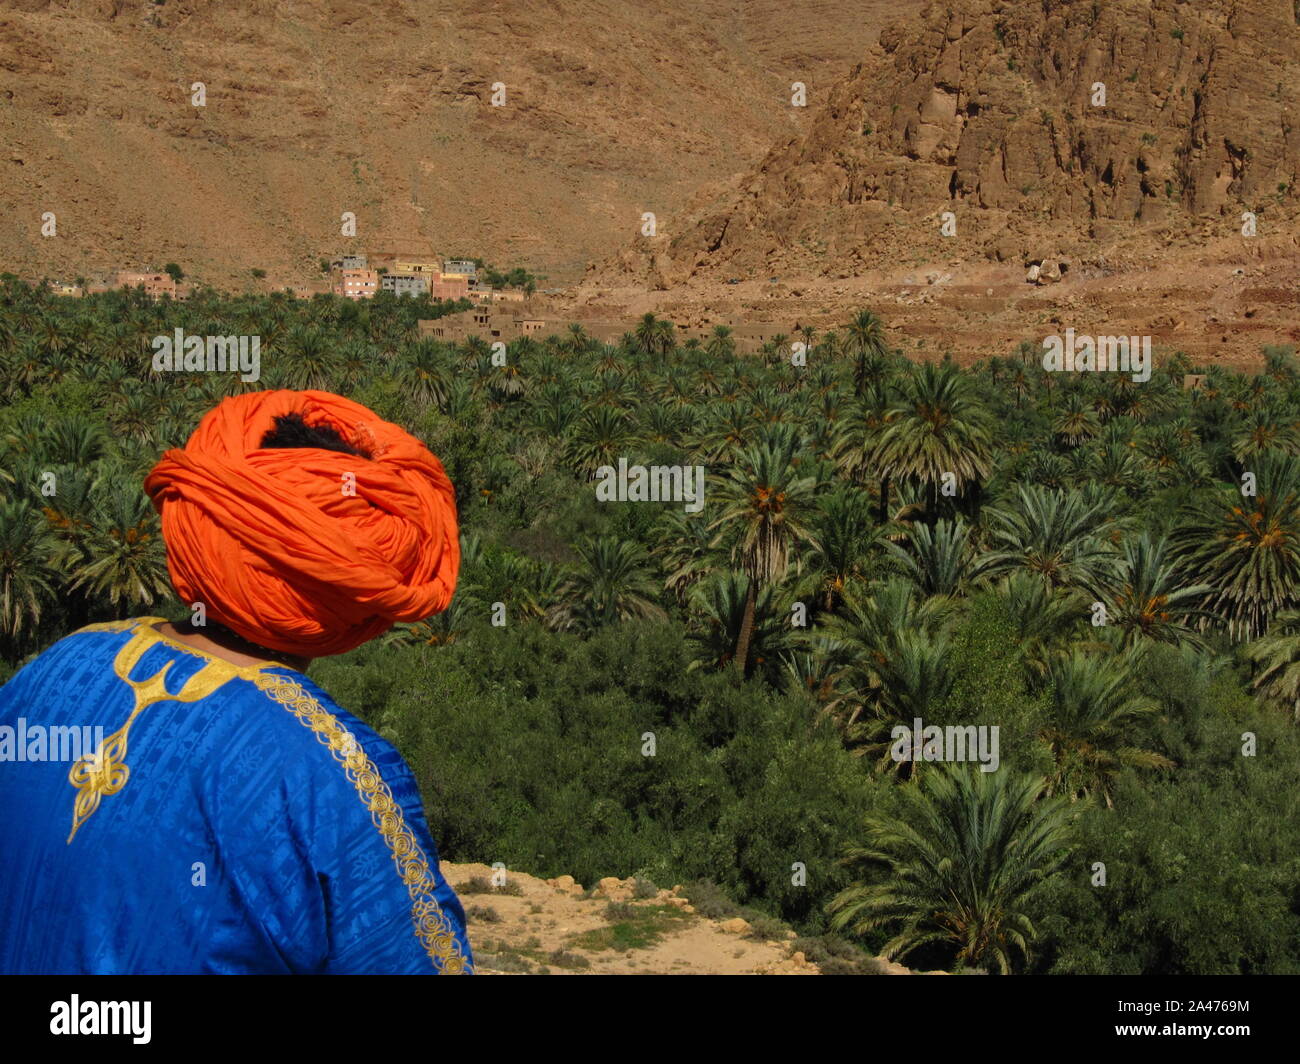 Arab man with orange turban and blue chilaba looks towards the palm grove in Morocco in October 2019 Stock Photo